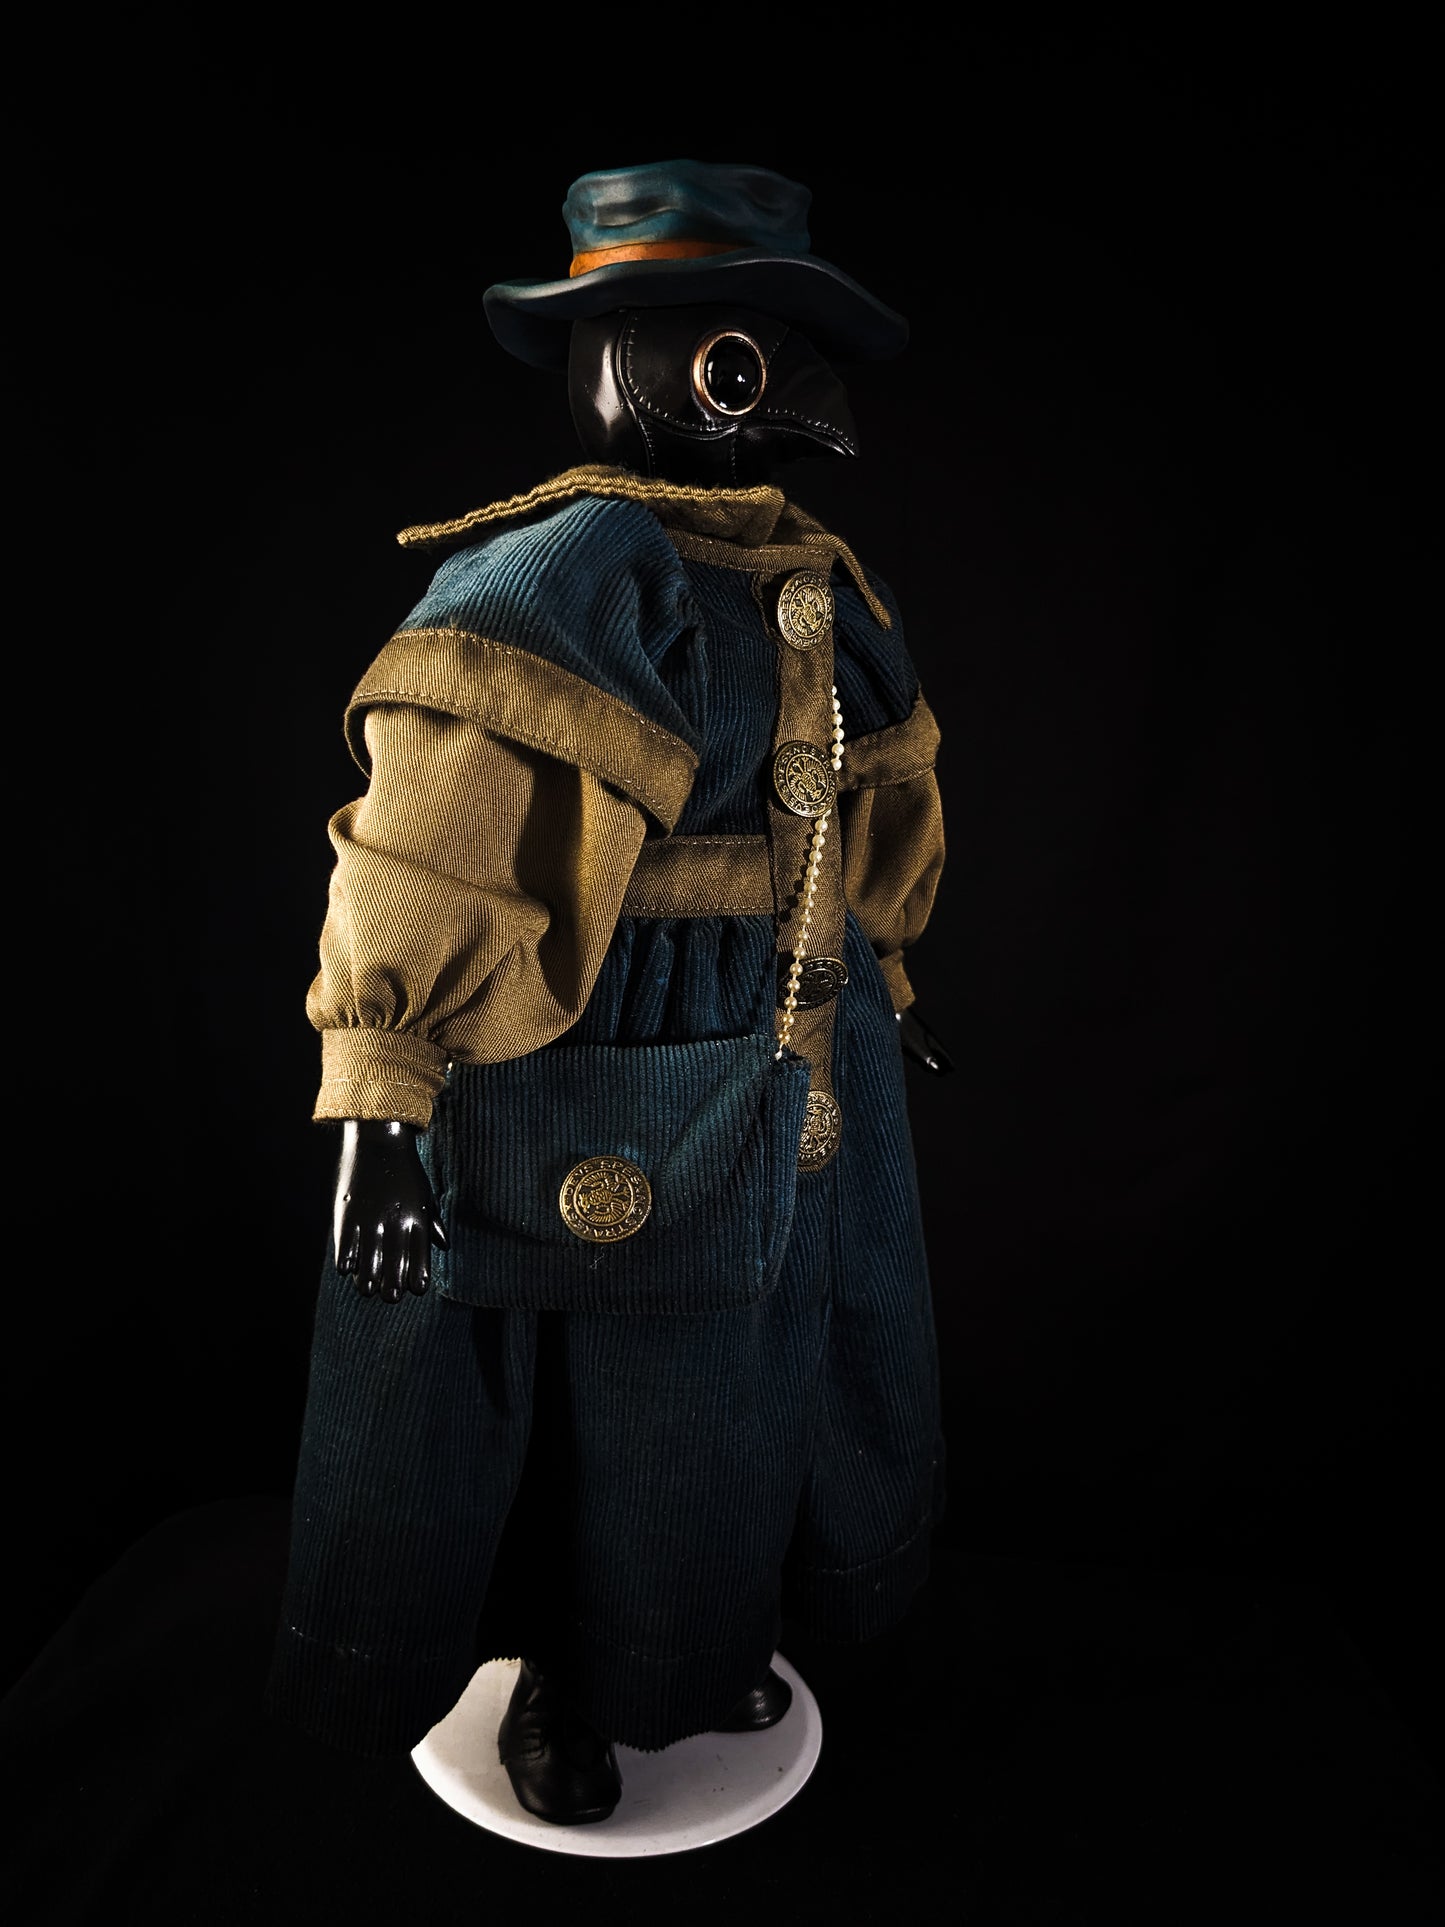 Depression Dolls: The Doctor II - Handmade Plague Doctor Gothic Art Doll for Enigmatic Souls